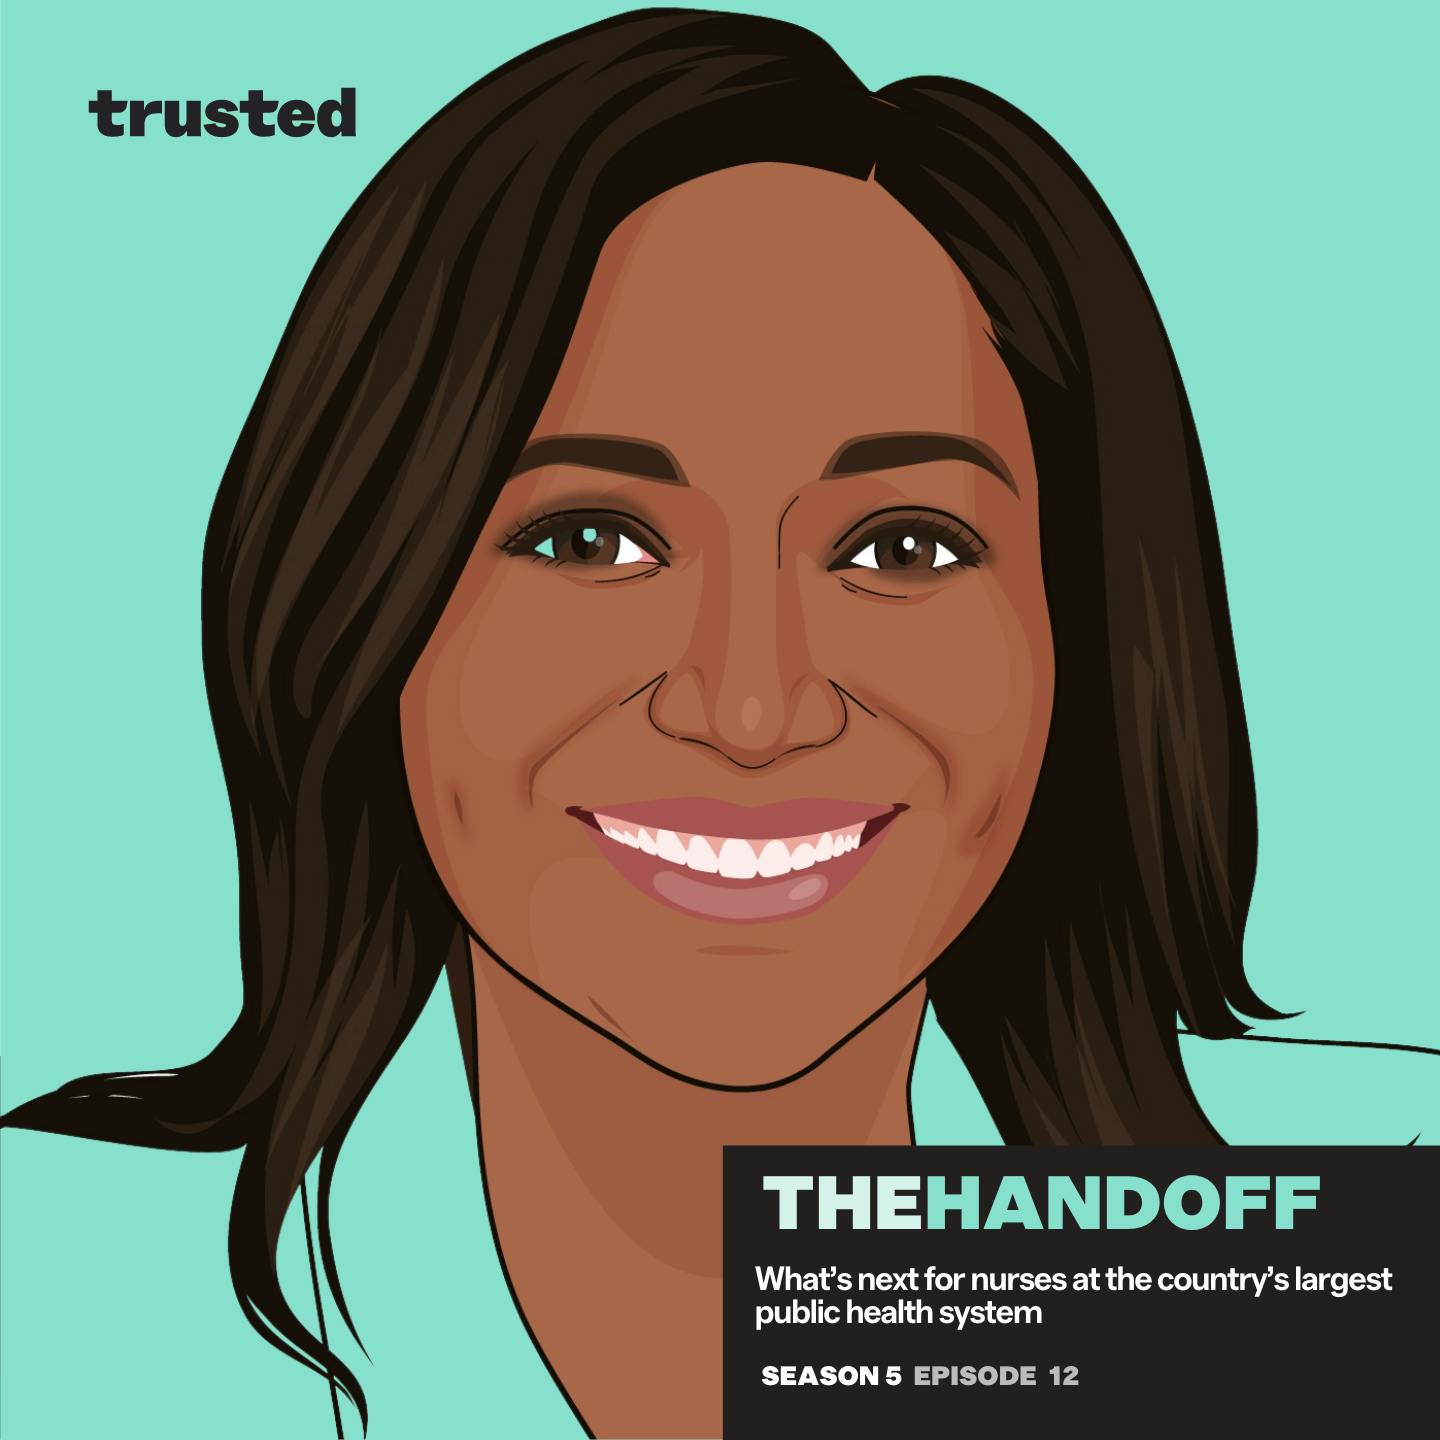 The Handoff: What’s next for nurses at the country’s largest public health system